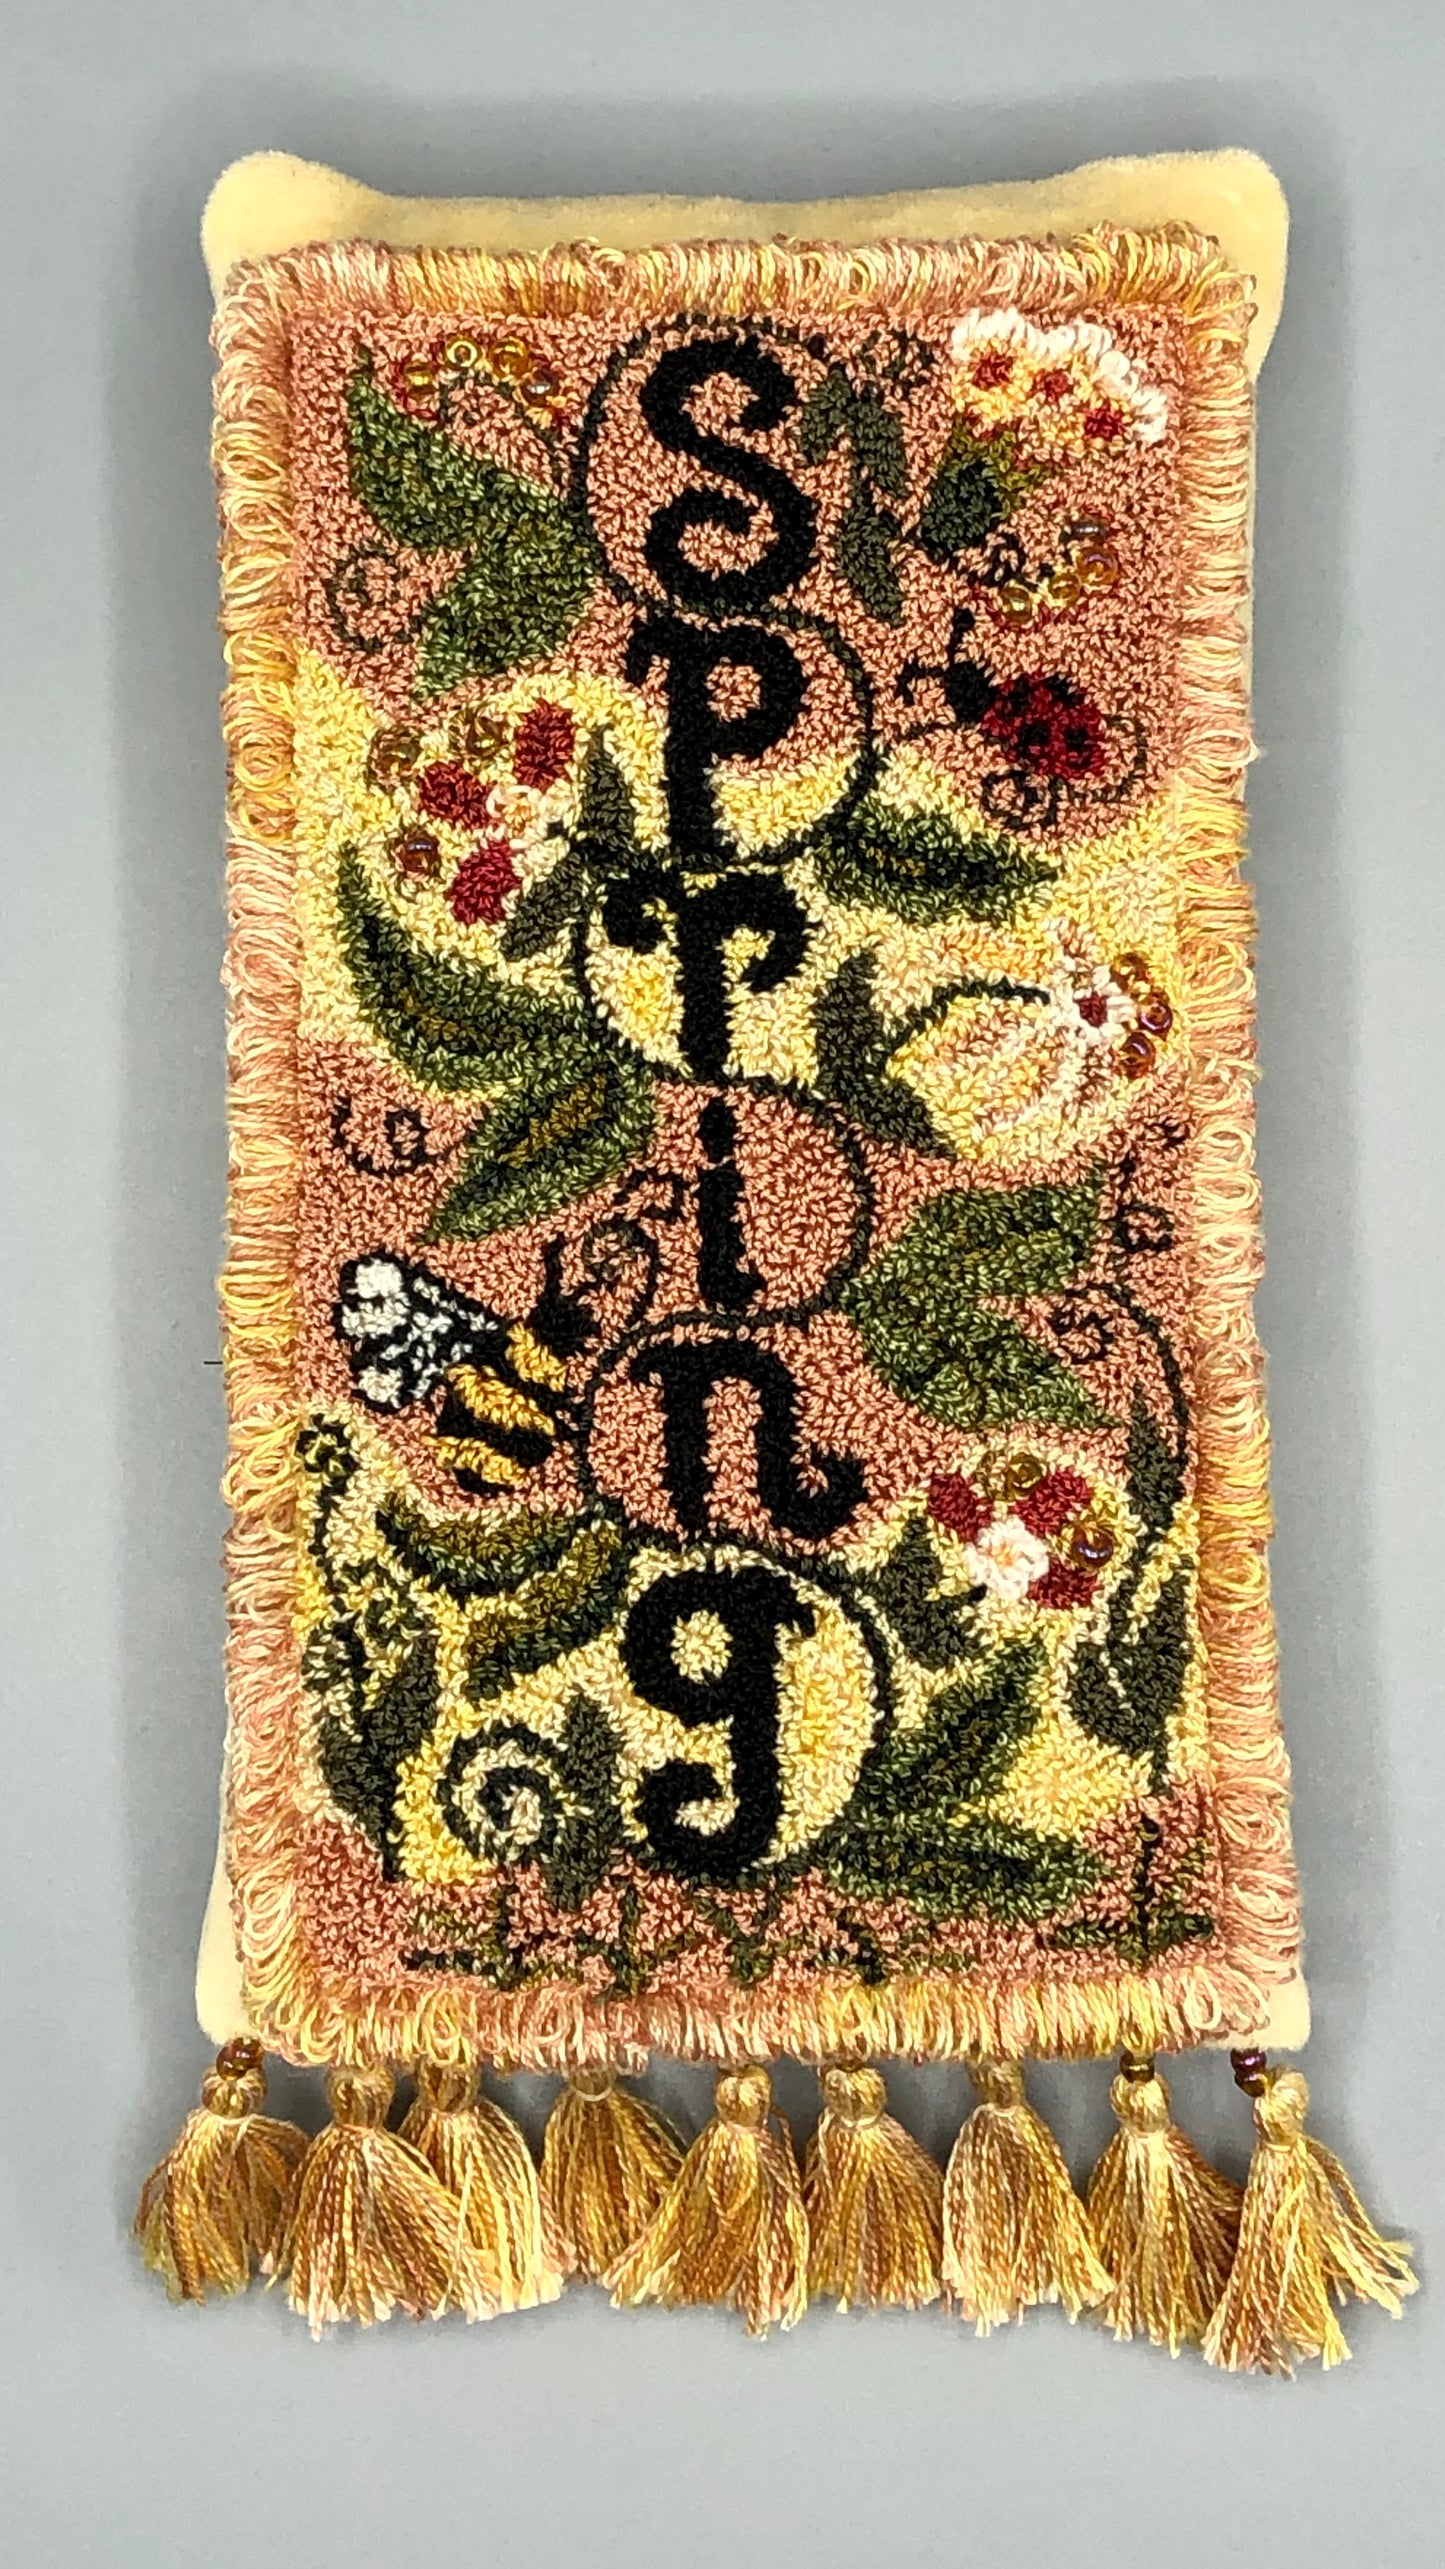 Spring Vine- PDF punch needle pattern digital download by Orphaned Wool. This lovely Spring Vine has a sweet bumblebee and ladybug and flowers all in the pattern. Copyright 2020 Kelly Kanyok , Orphaned Wool. Enjoy creating this beautiful Spring Vine design.